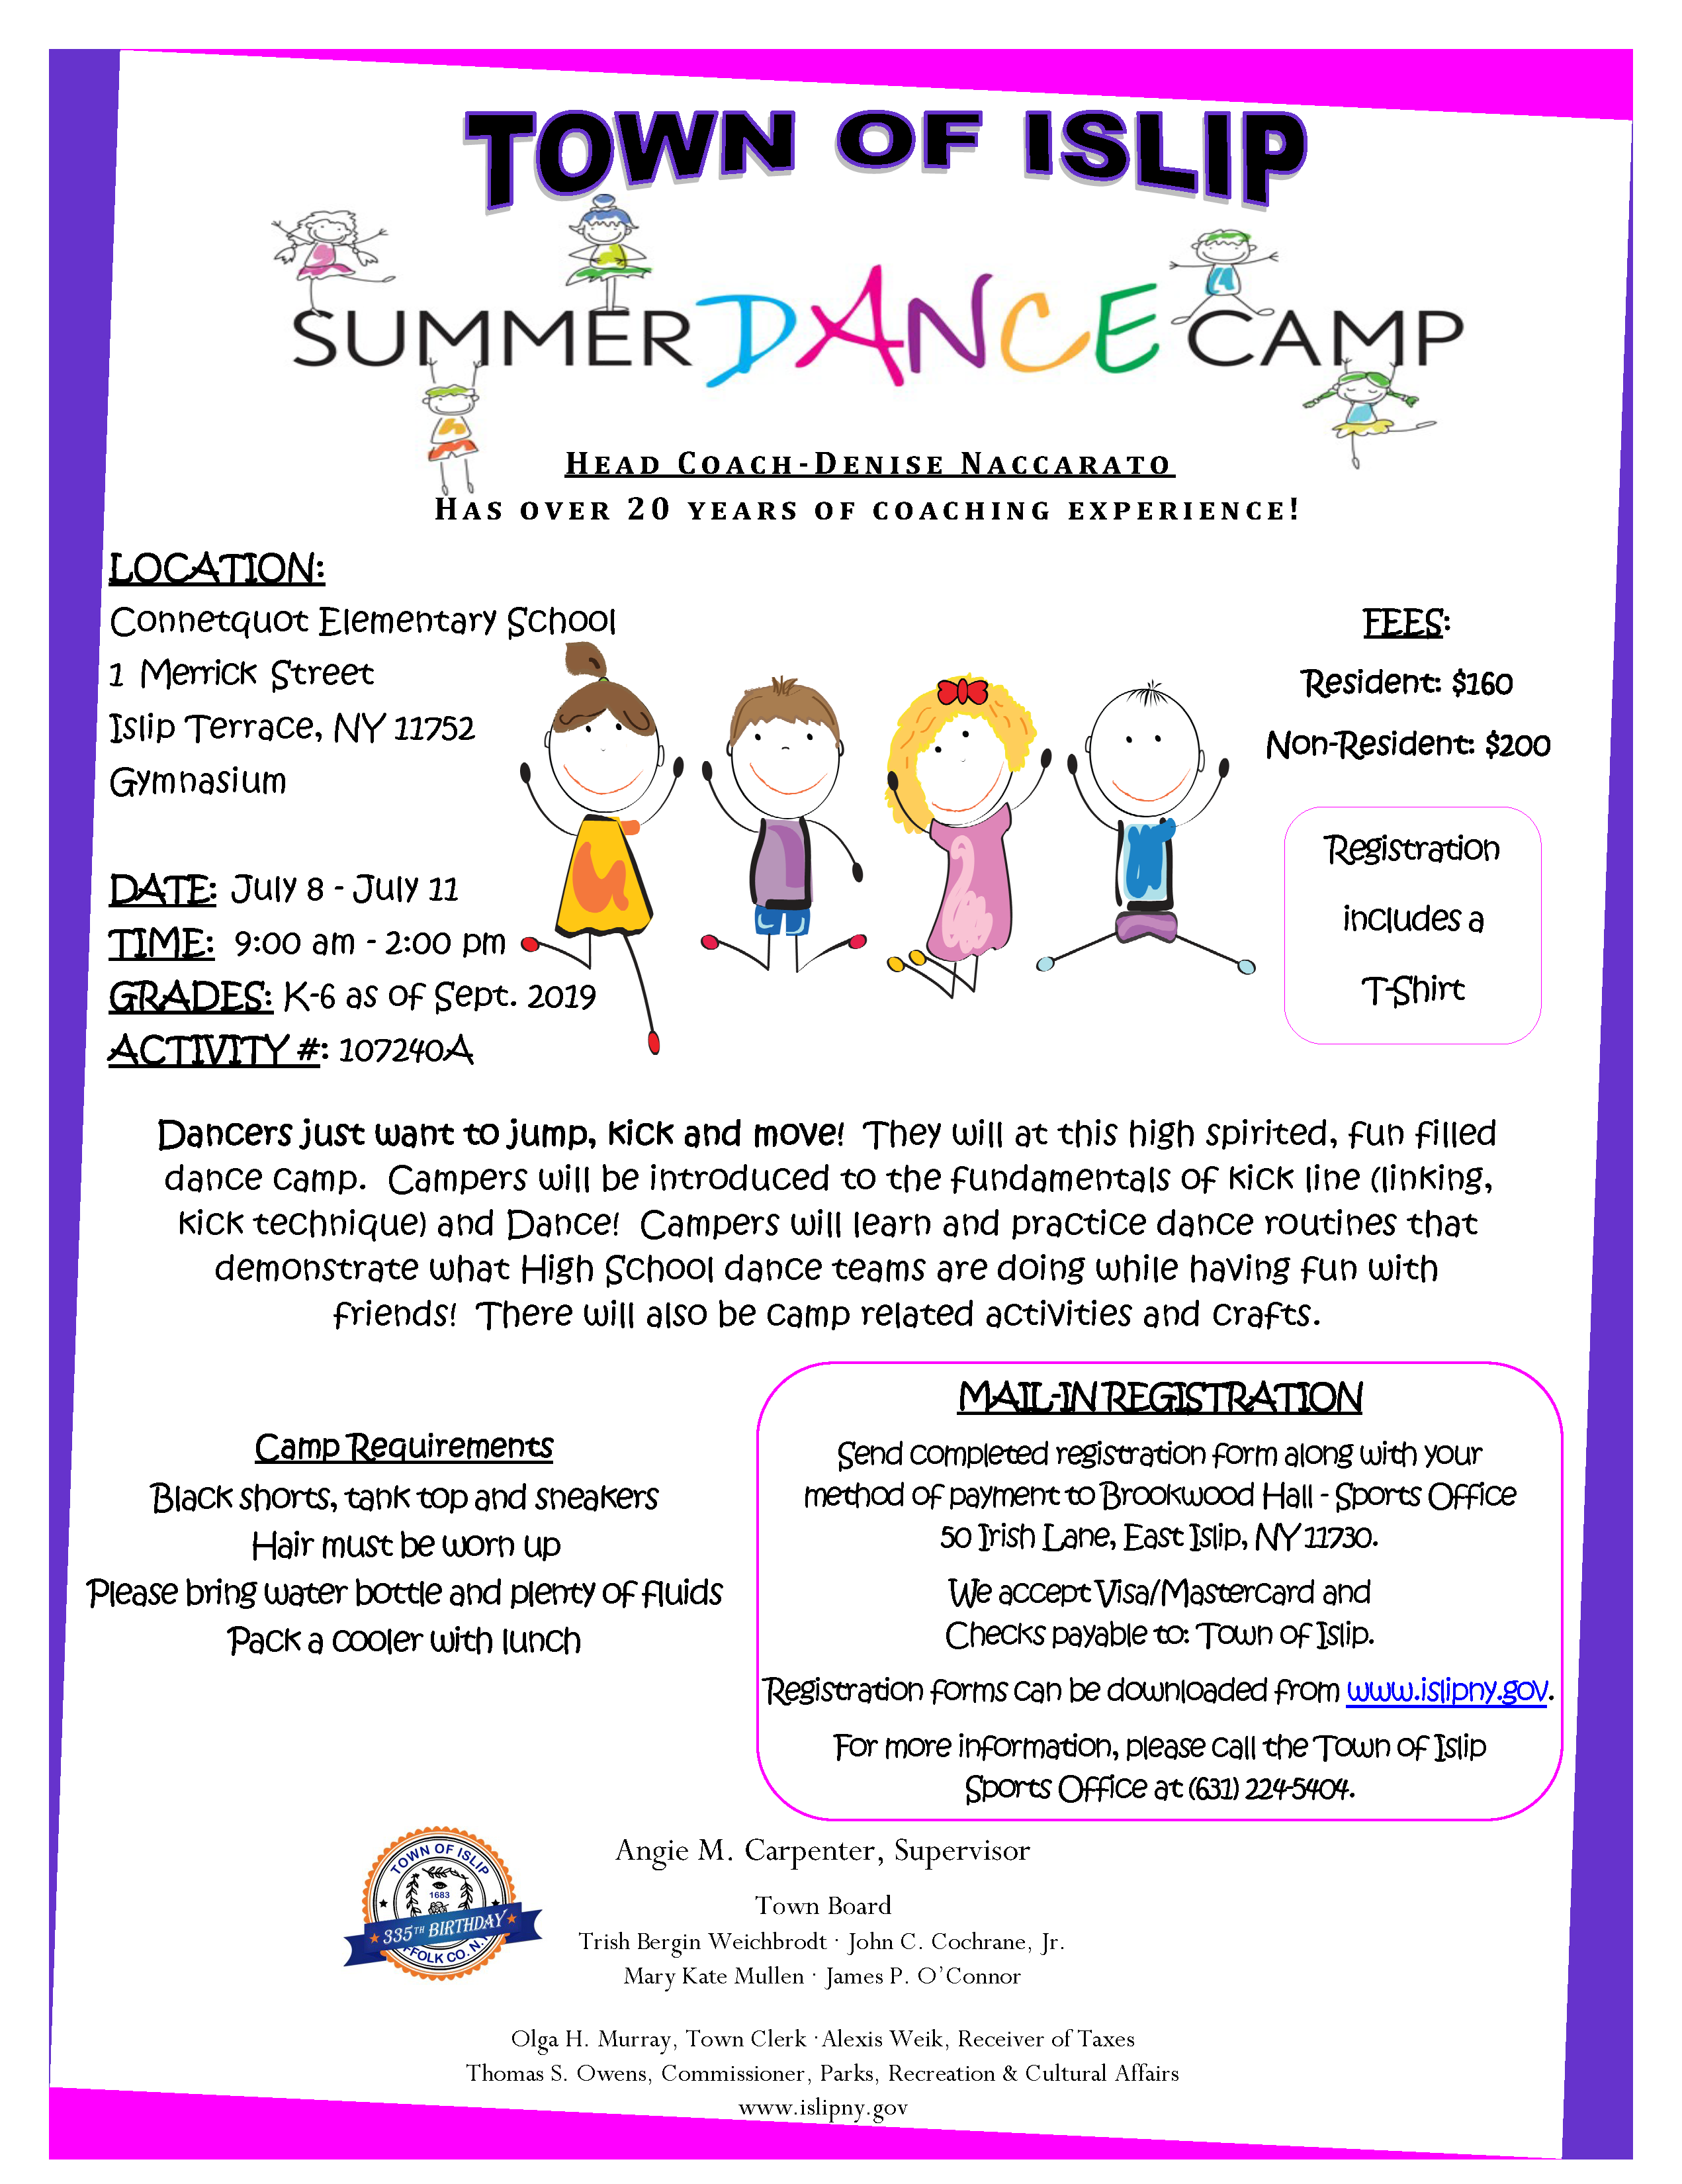 a flyer announcing the 2019 summer dance camp, call (631) 224-5404 for more information.